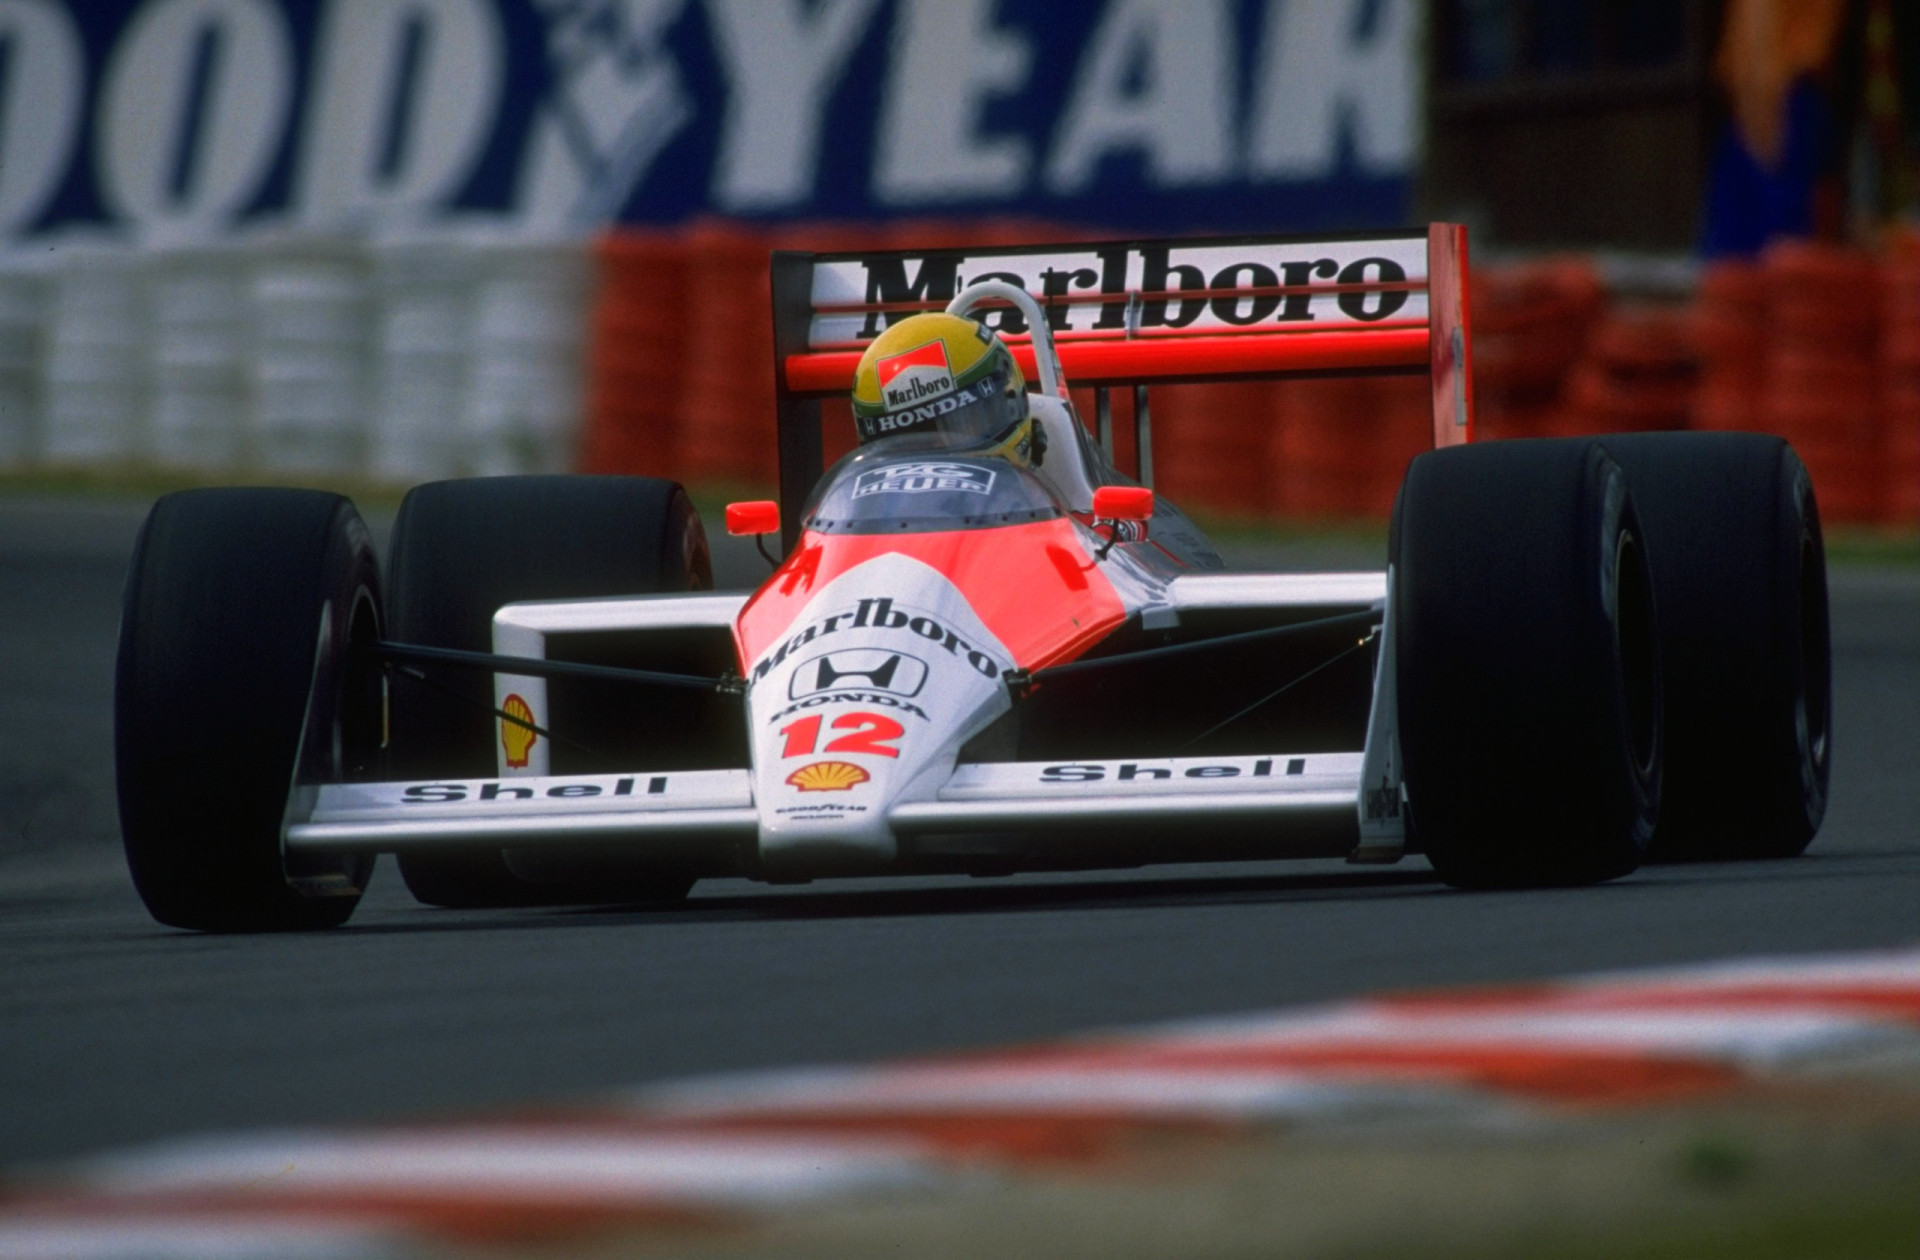 <p>Senna, now driving for McLaren in the impressive McLaren MP4/4, began the 1988 season by being disqualified on a technicality at home in Brazil. It was an ignominious start. But in his first season with his new team, Senna won a then record eight races and captured his first Formula One championship.</p><p>You may also like:<a href="https://www.starsinsider.com/n/396026?utm_source=msn.com&utm_medium=display&utm_campaign=referral_description&utm_content=703485en-us"> Celebrities who go by their middle names</a></p>